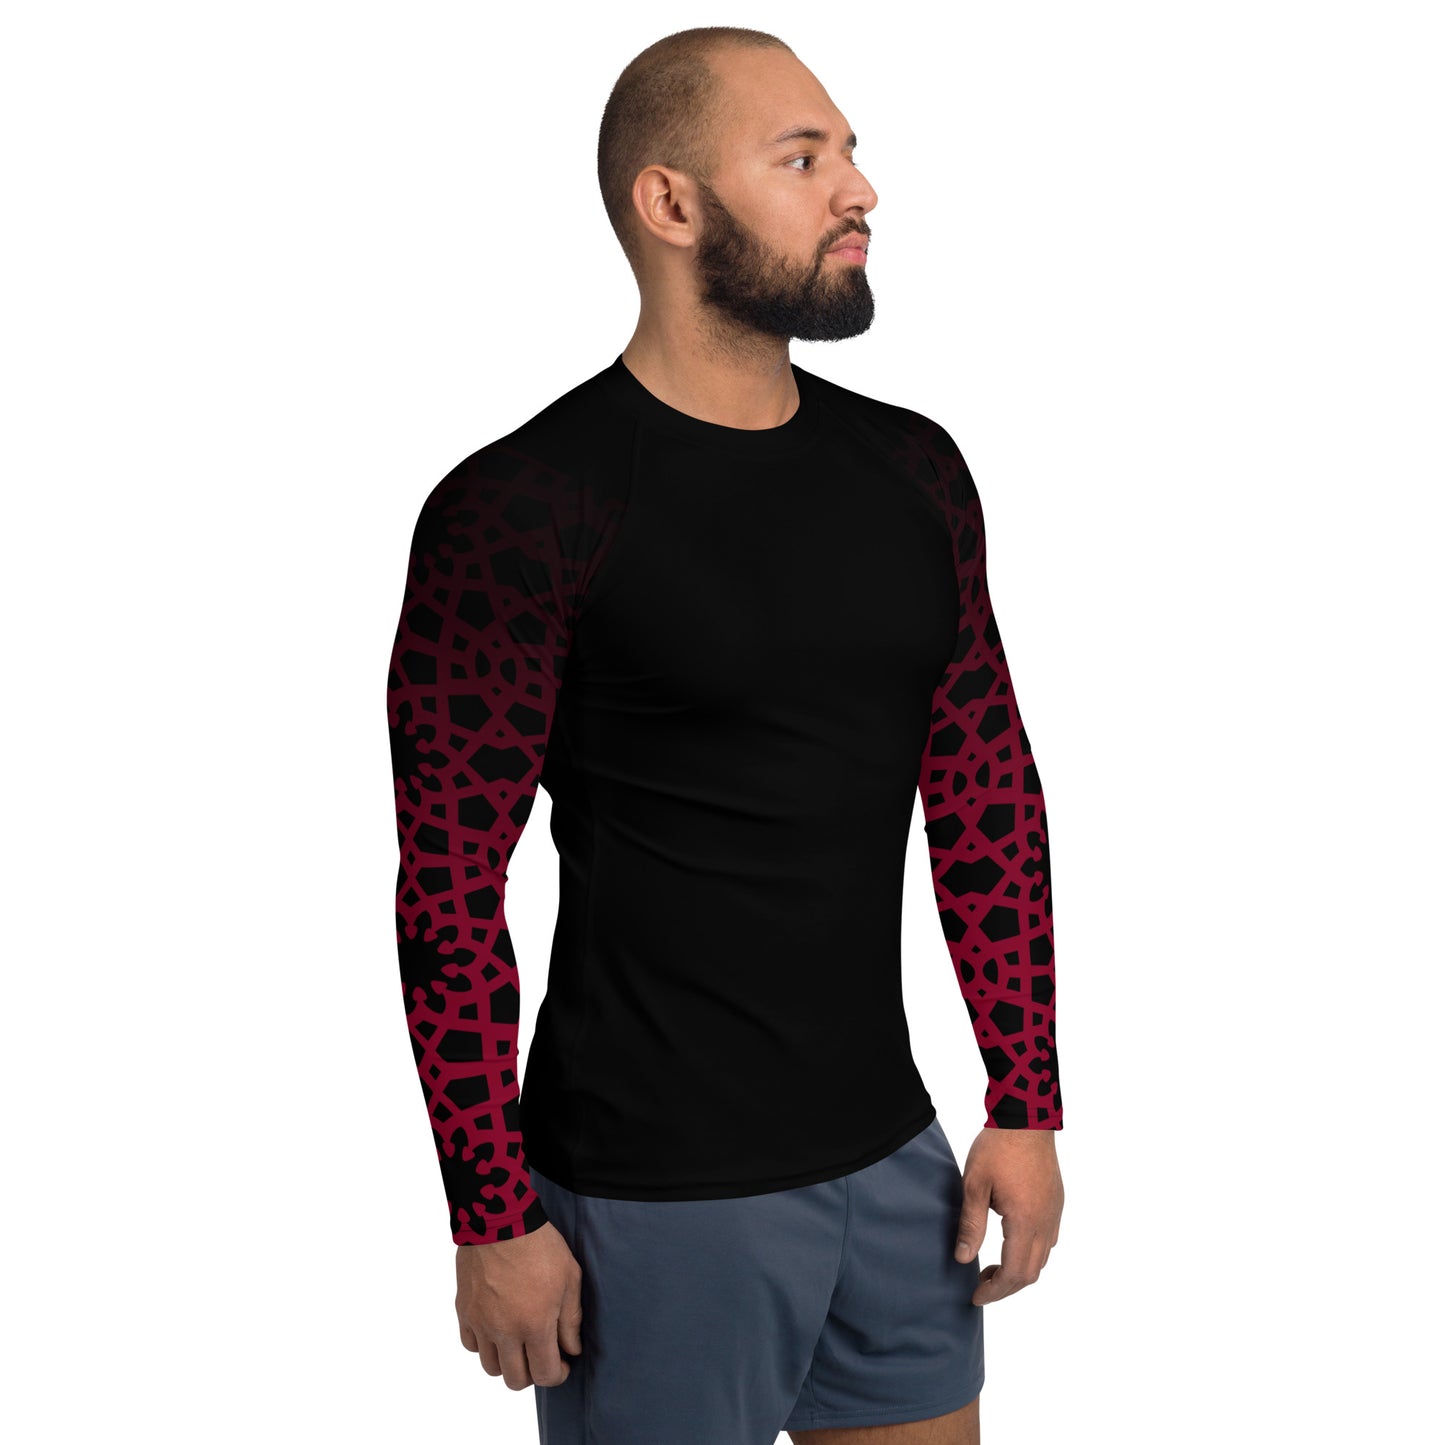 Men's Rash Guard - Geometric Ombre in Black and Red Sleeve